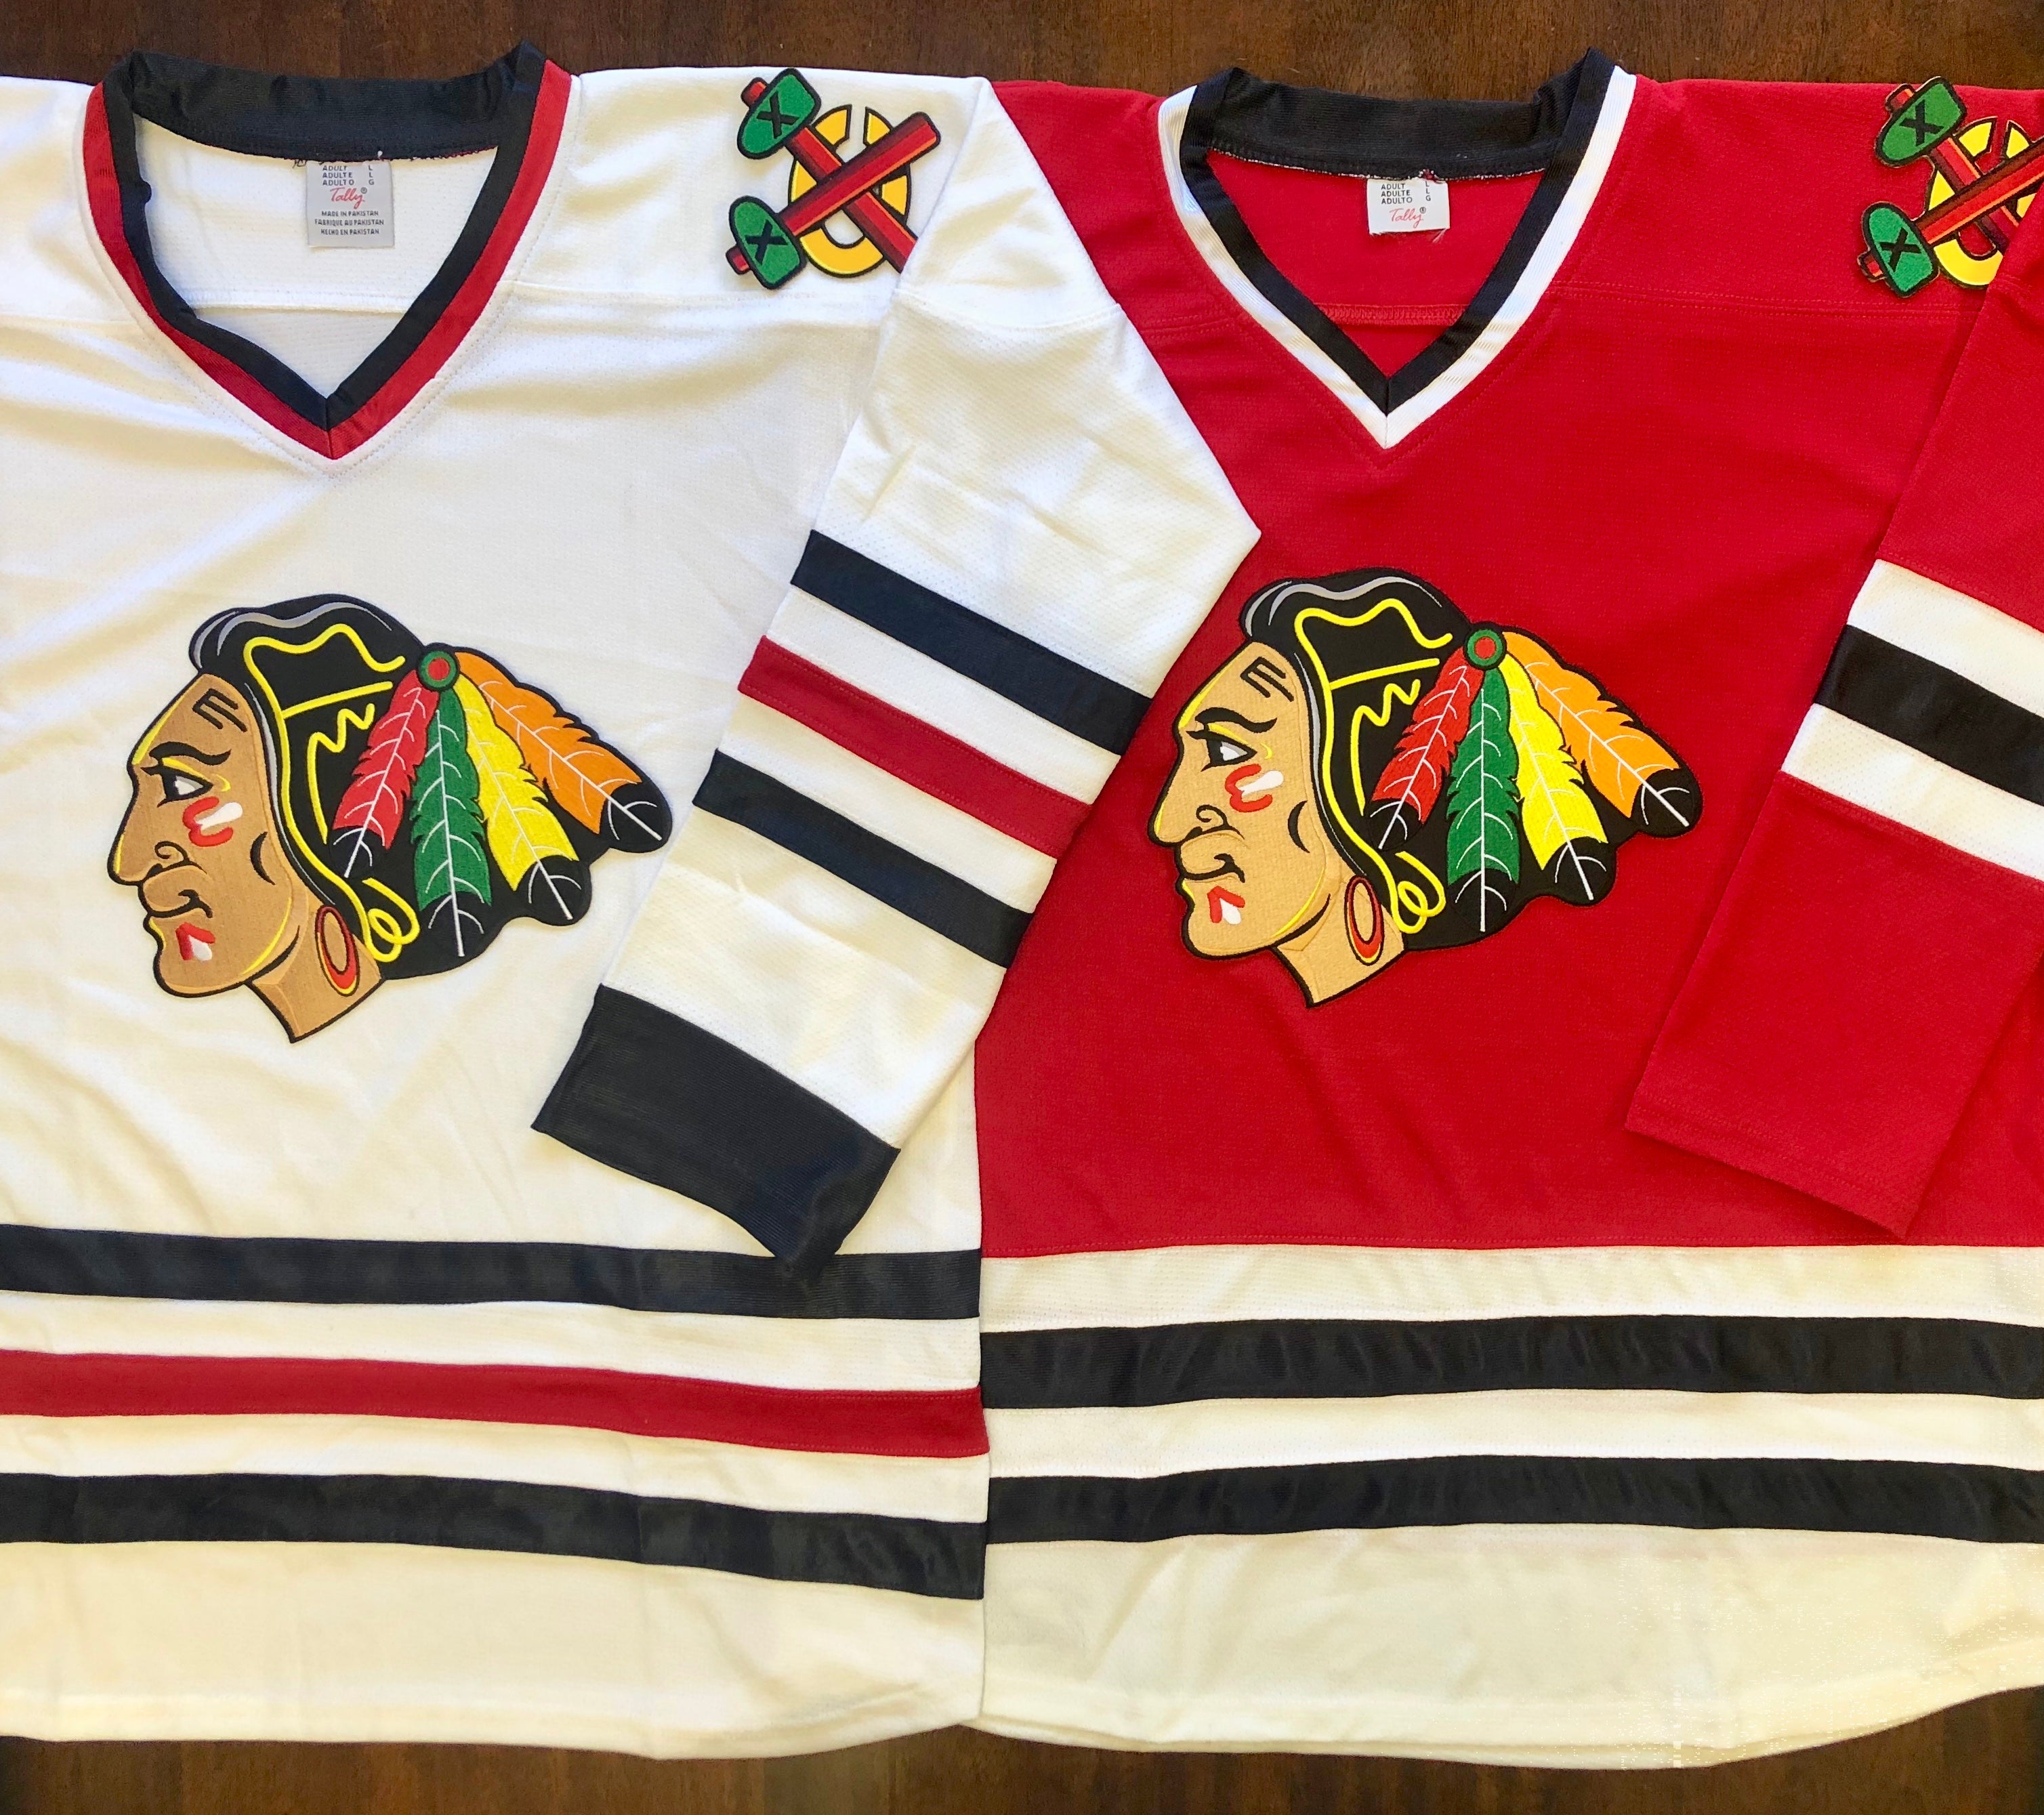 Custom Hockey Jerseys with A Blackhawk Logo and Shoulder Patches Adult Large / (name and Number on Back and Sleeves) / Red